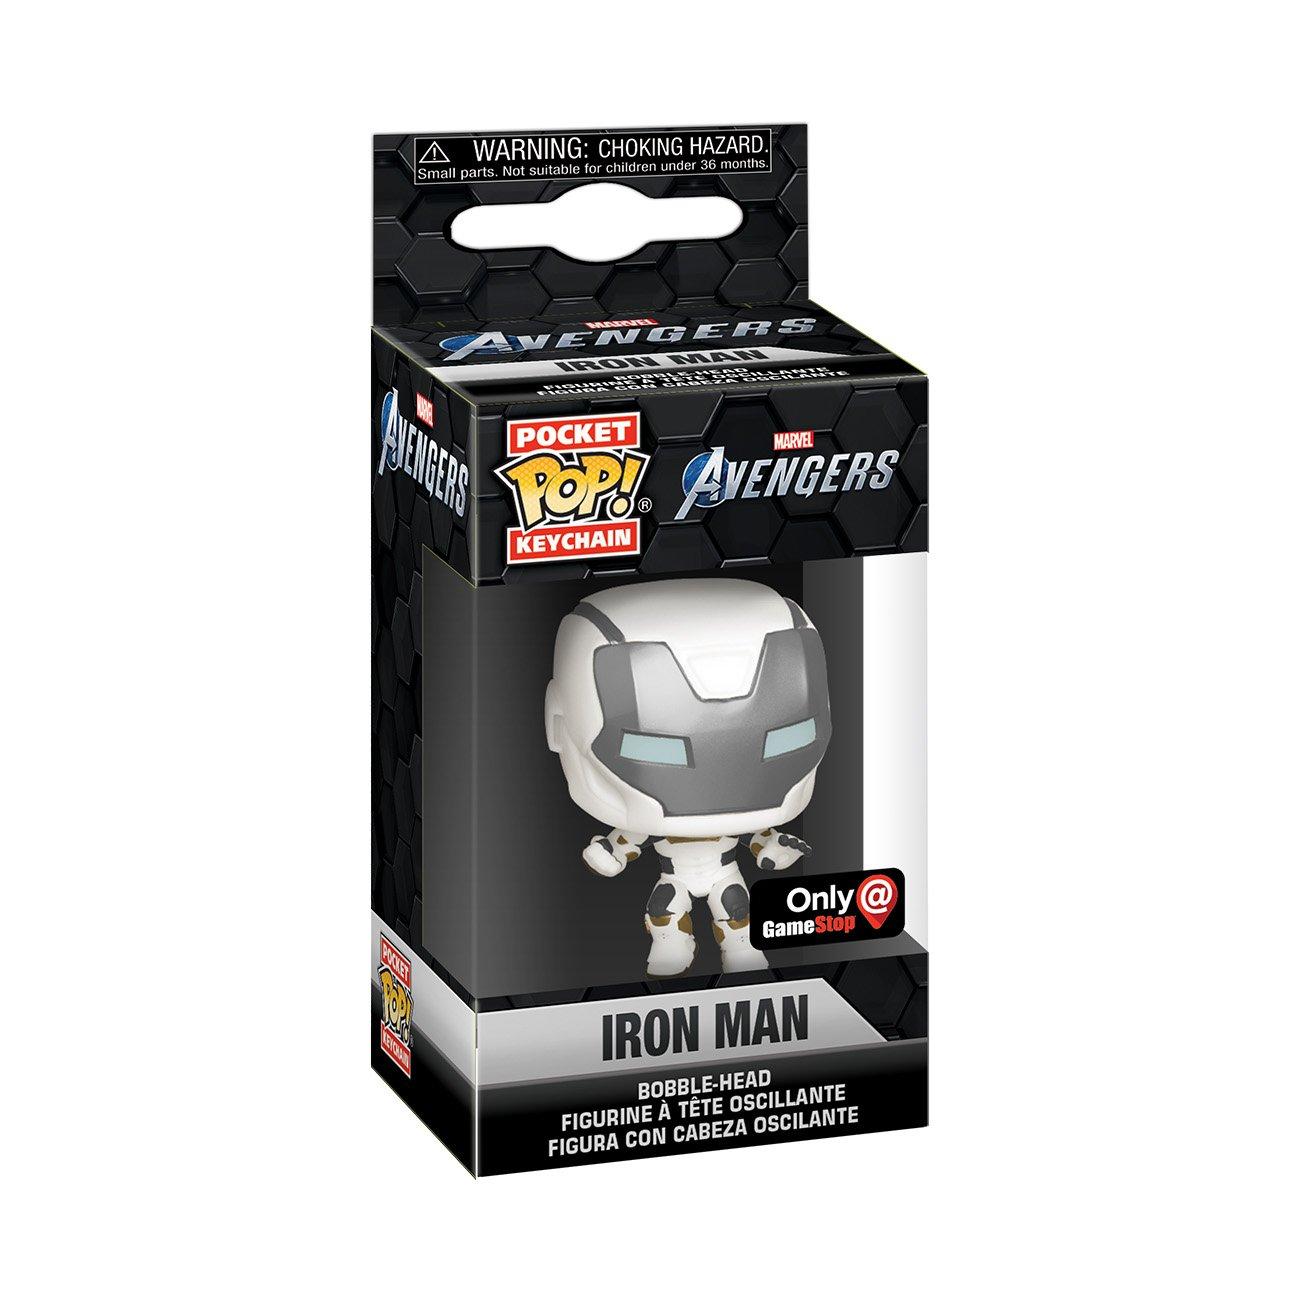 Funko Box: Marvel's Avengers Only at GameStop